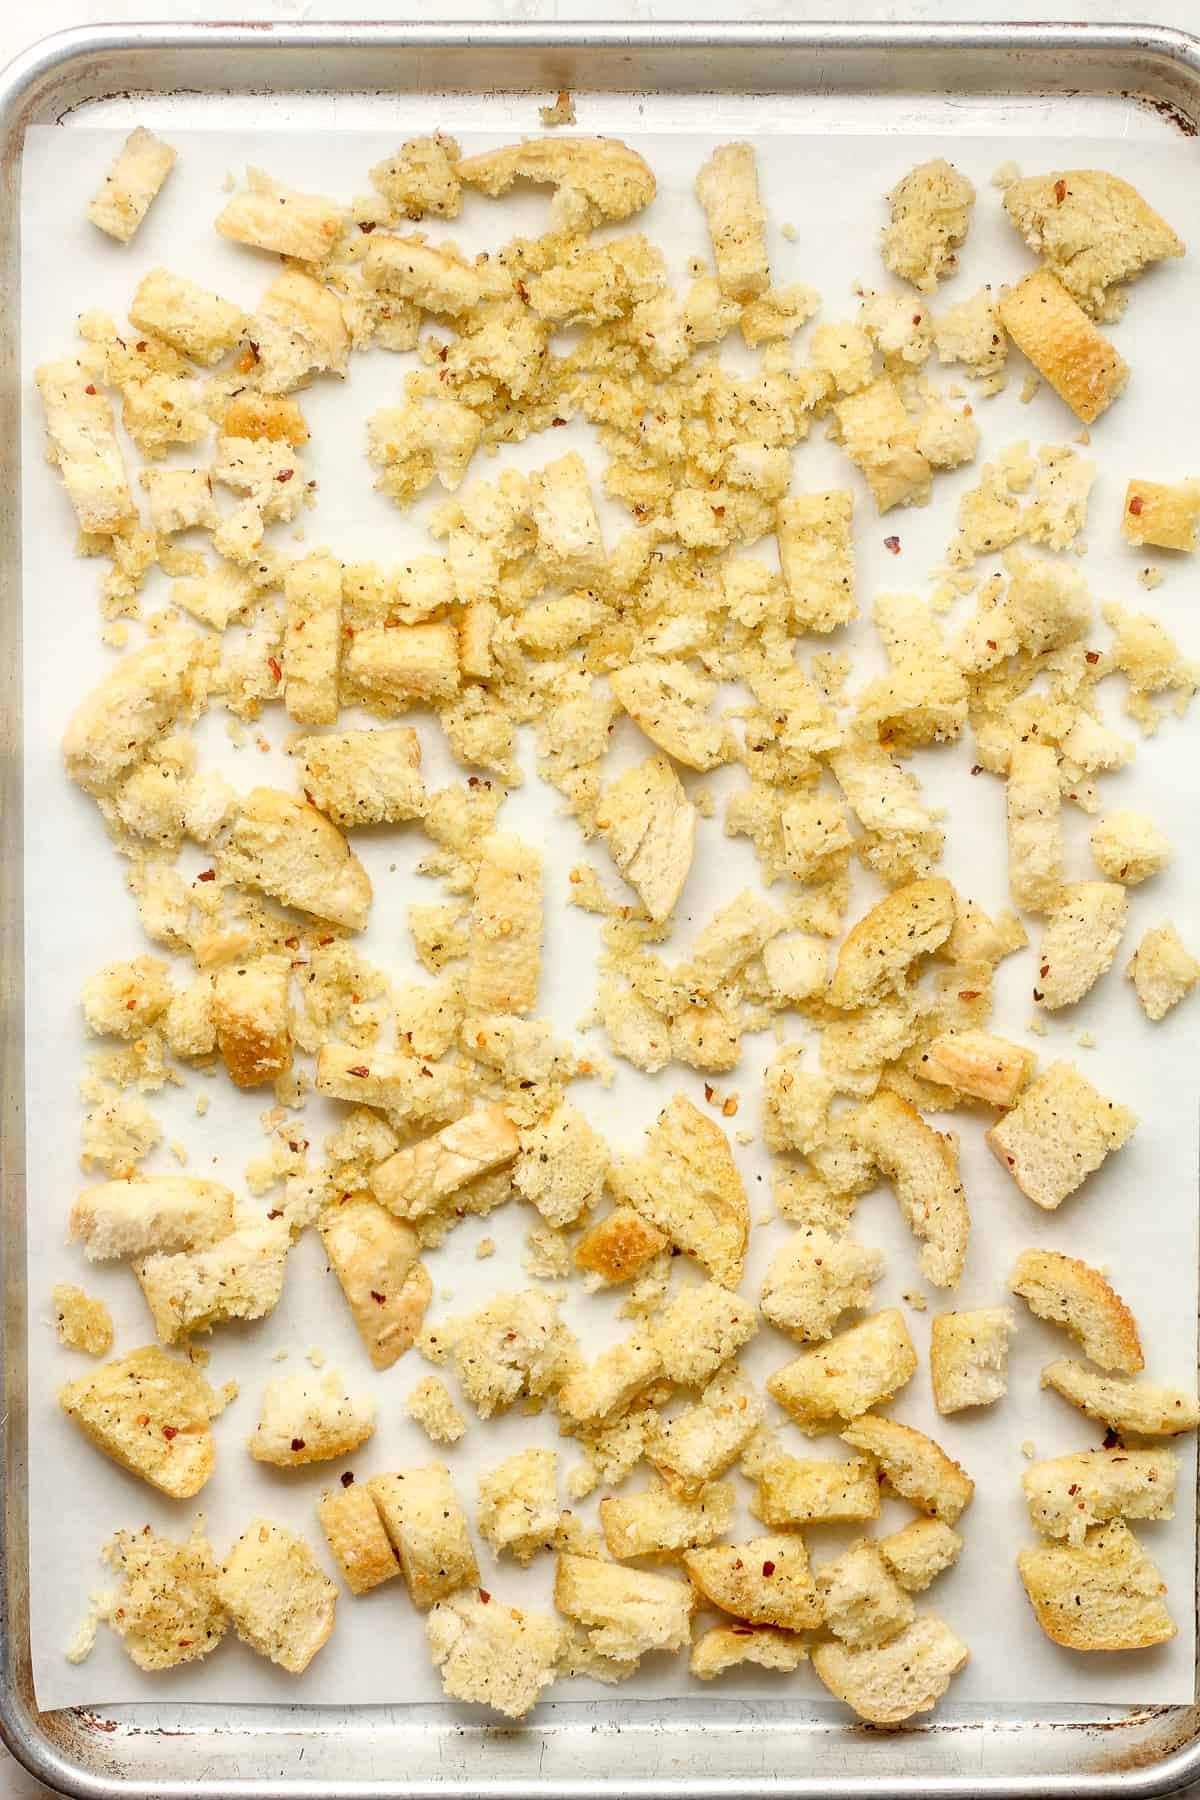 The prepped croutons on a baking sheet before baking.